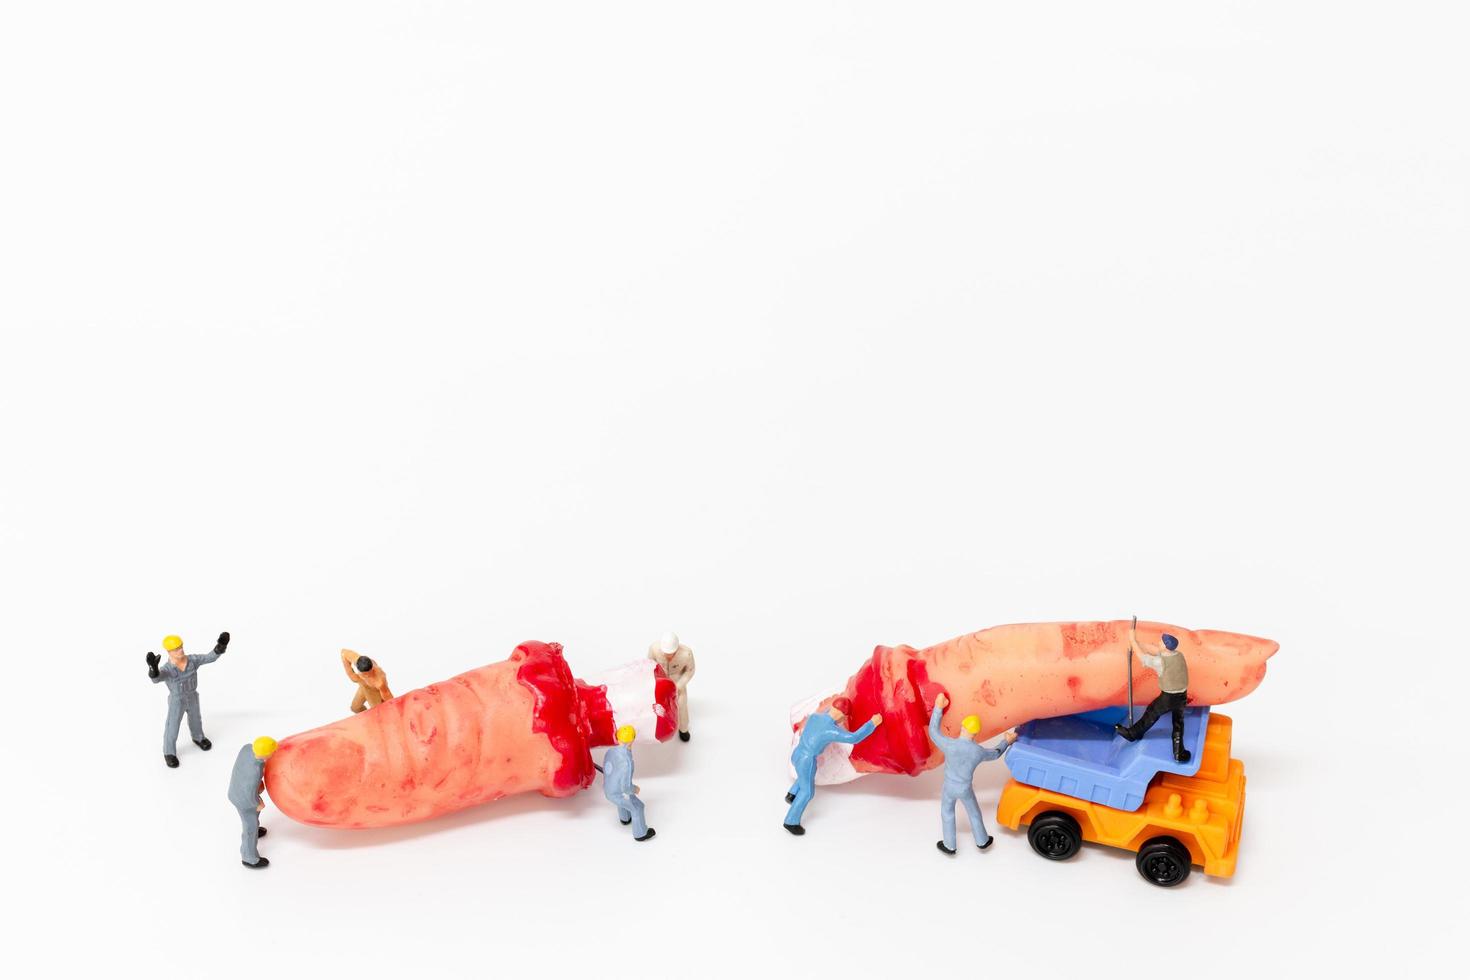 Miniature workers teaming up to create Halloween party props on a white background photo